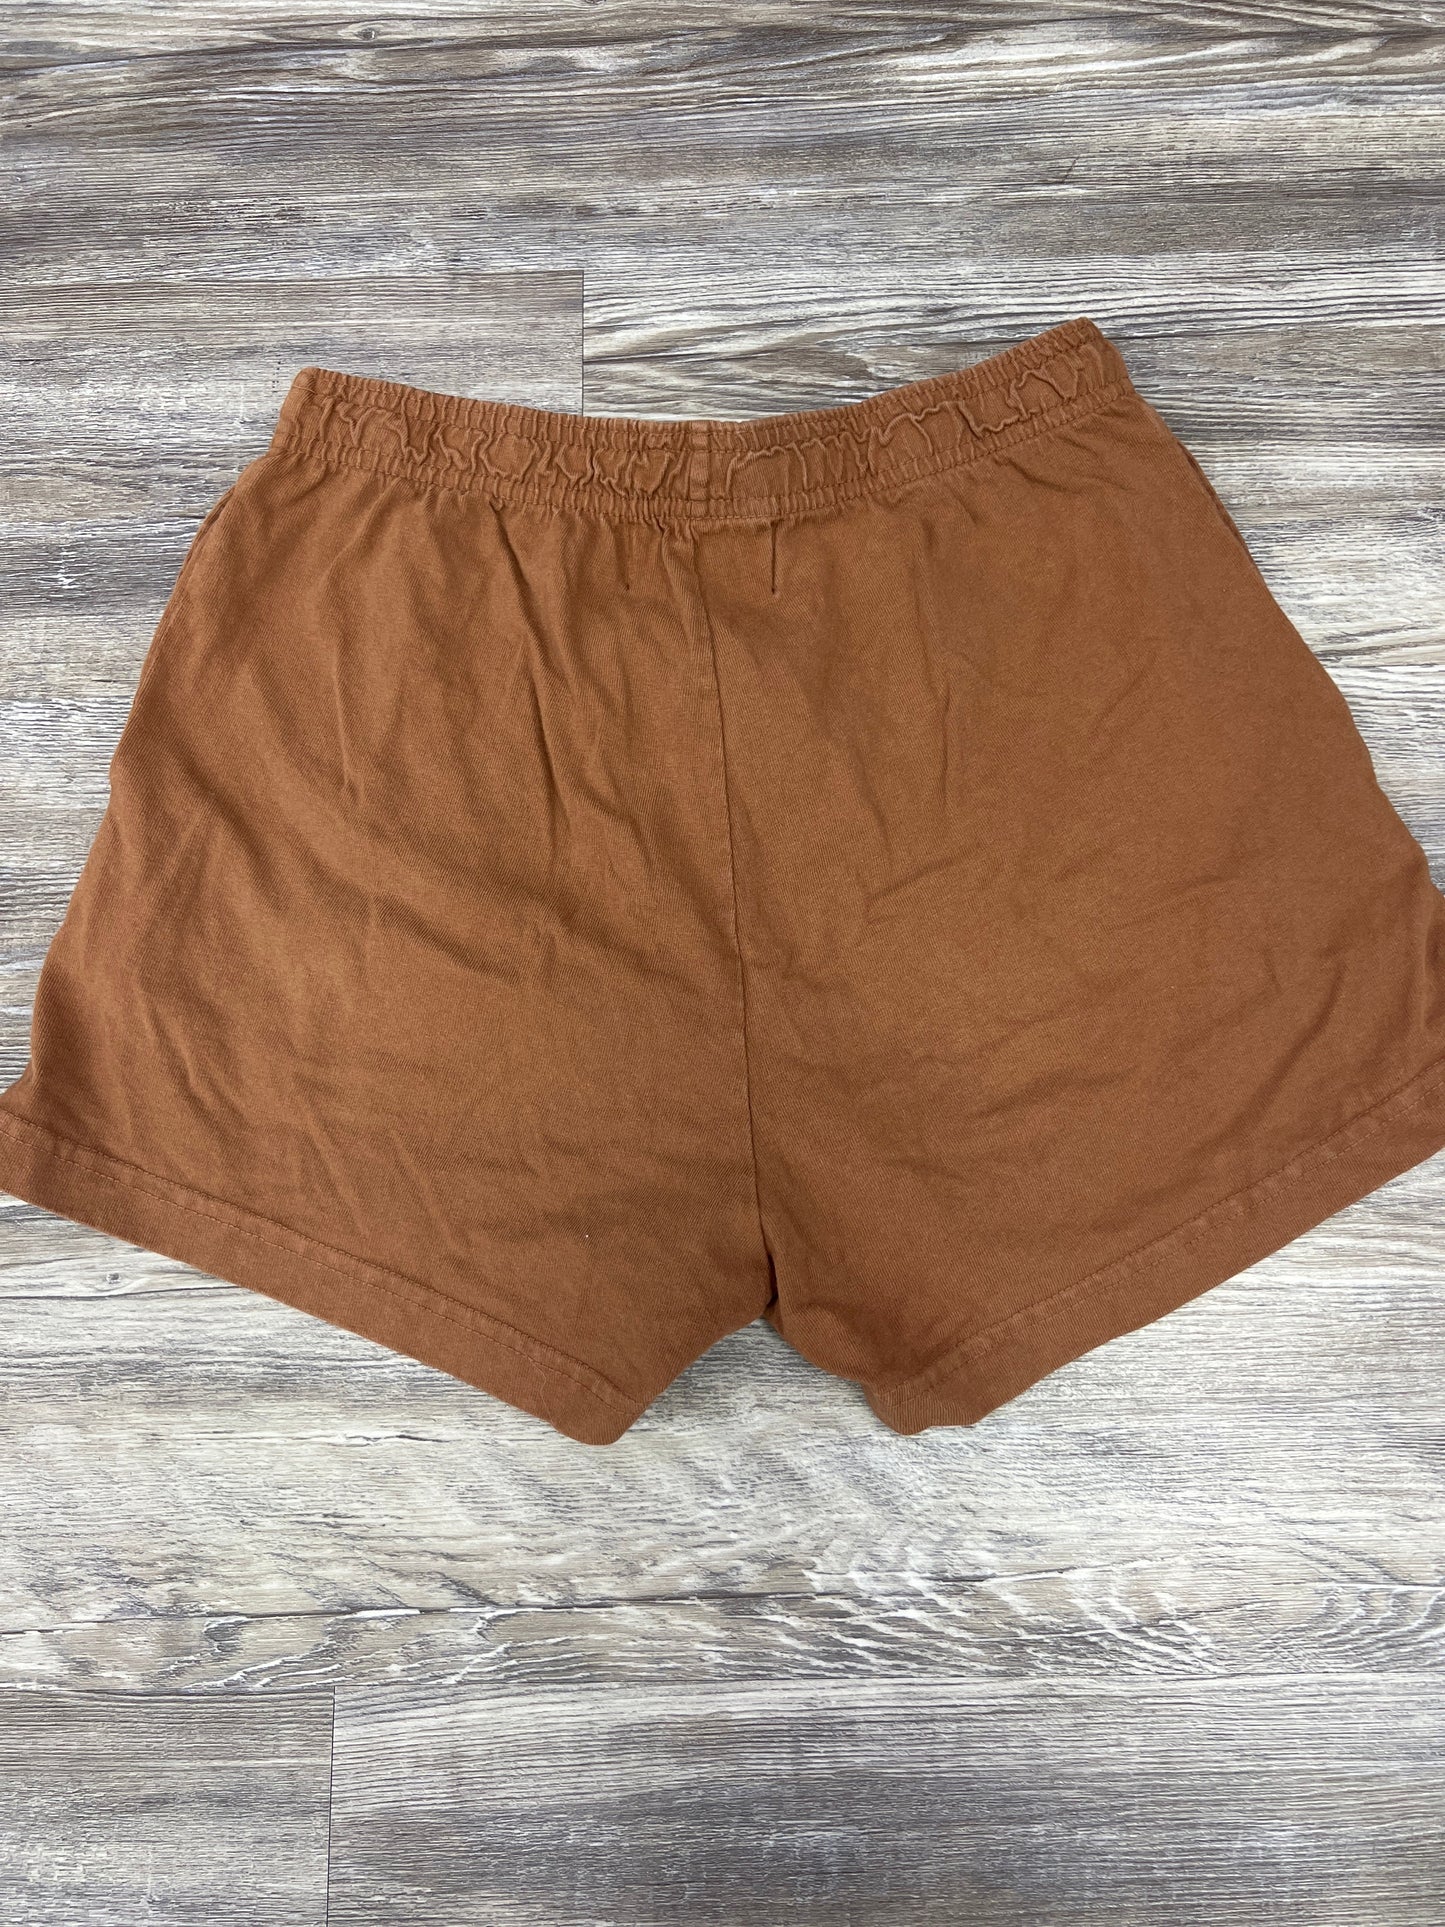 Shorts By Talentless Size: S